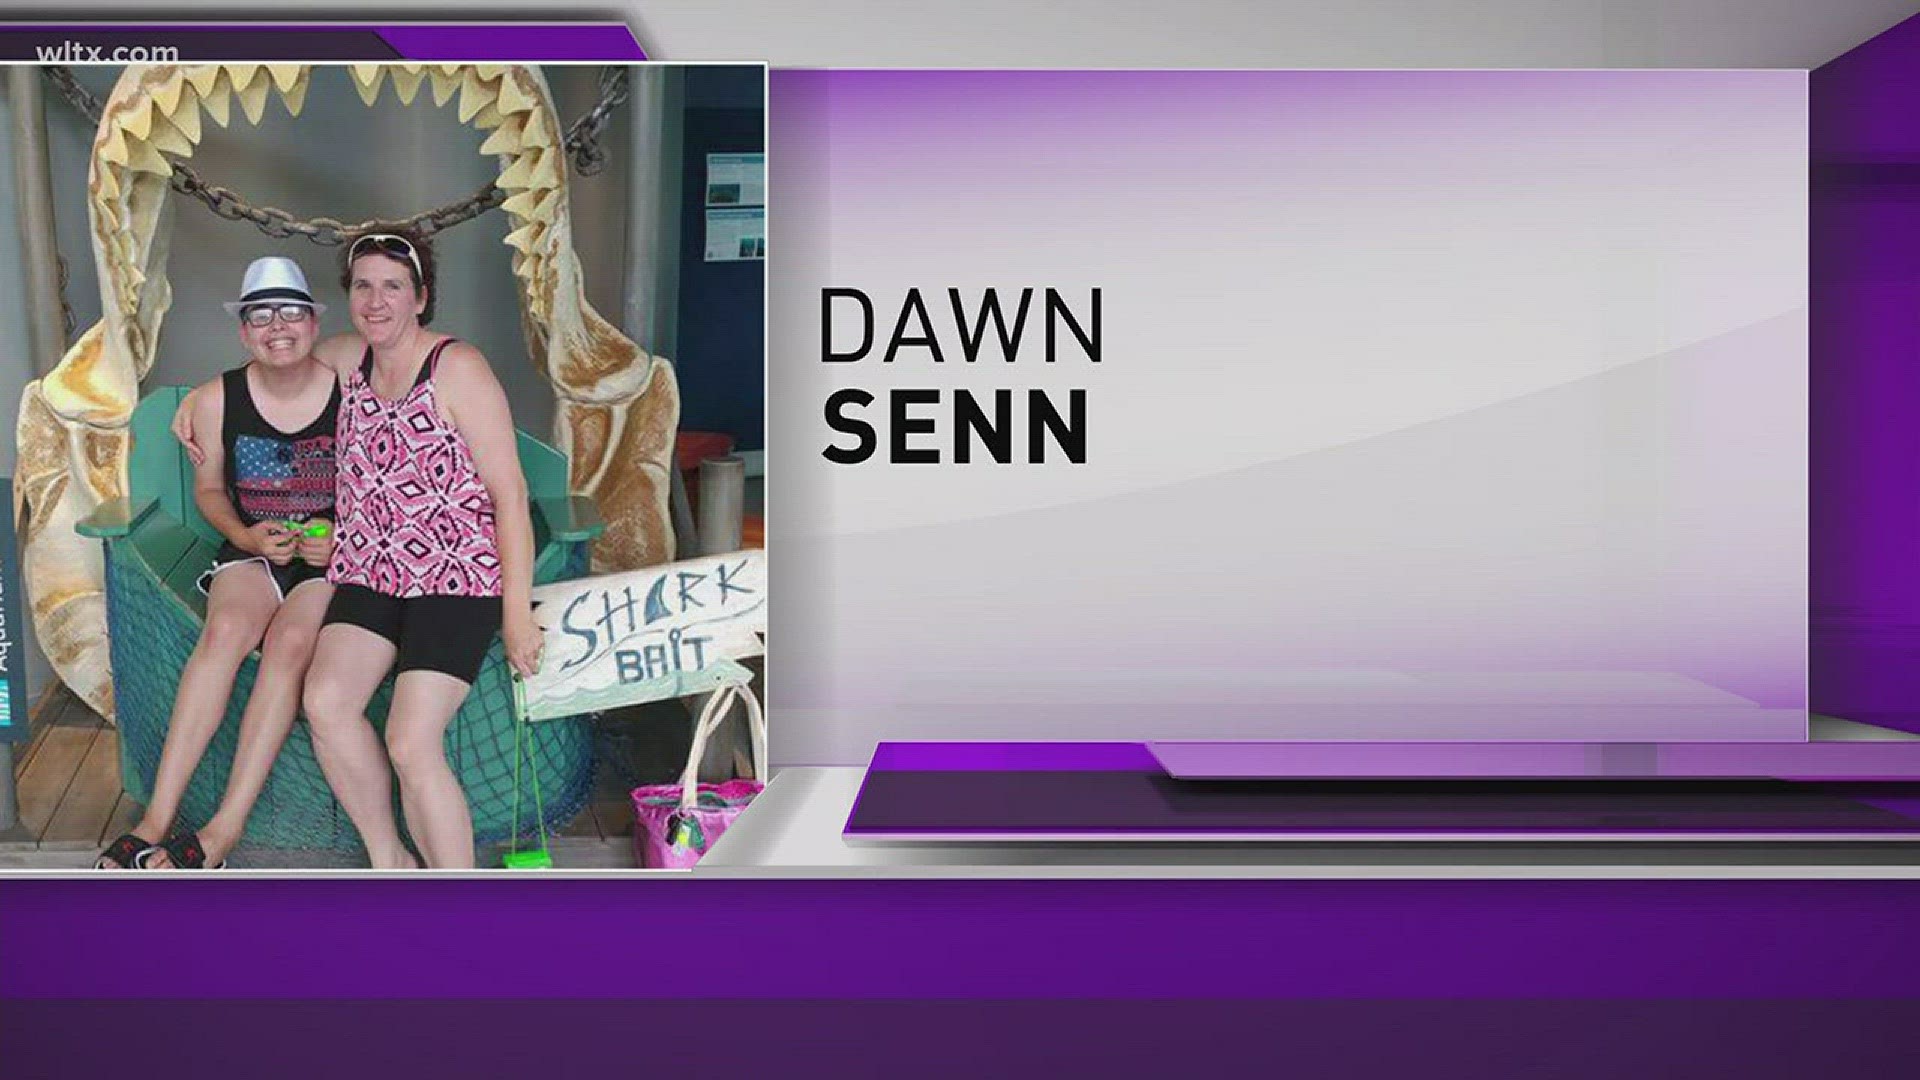 Congratulations to our Mom of the Day, Dawn Senn. Dawn was nominated by by her daughter, Brianna.